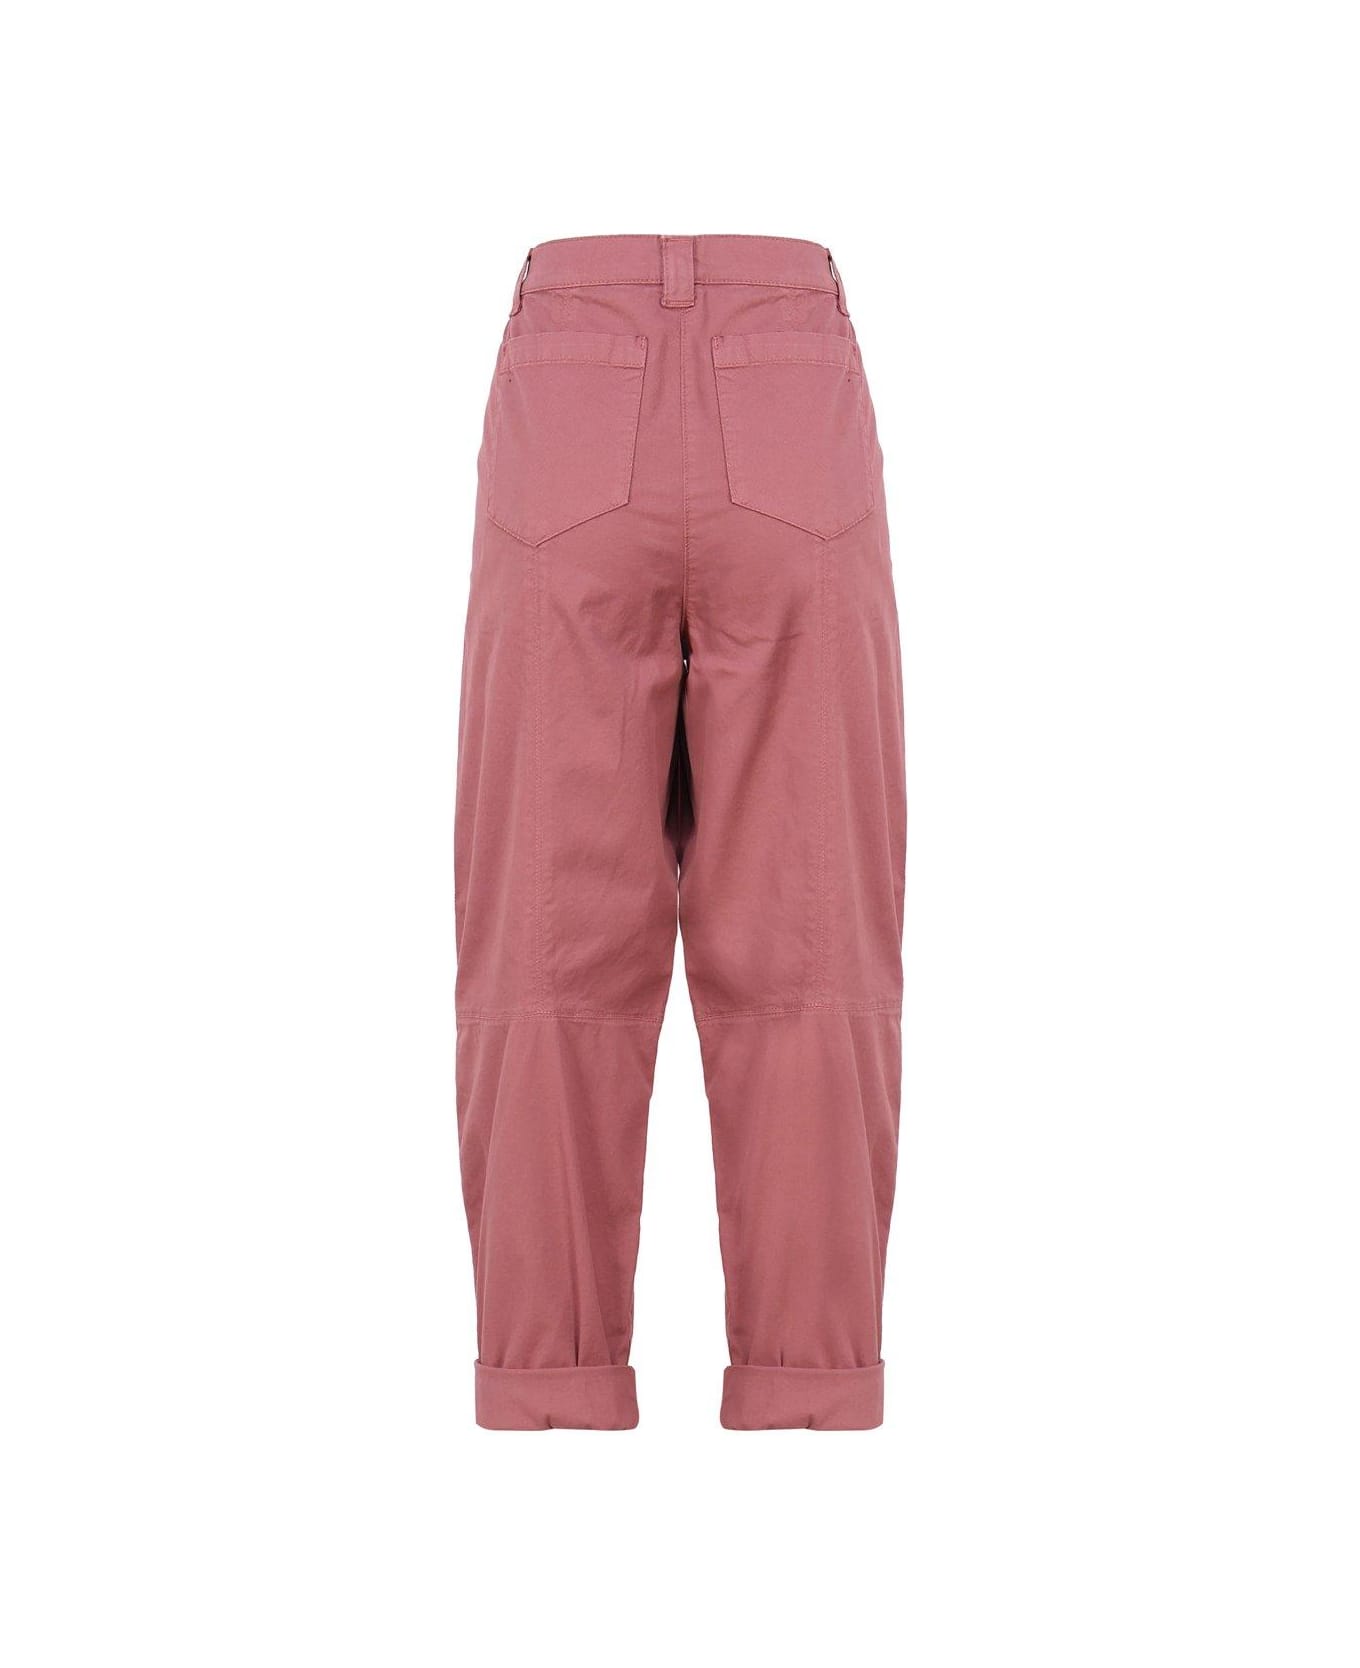 Pinko Carrot-fit Trousers - Pink ボトムス